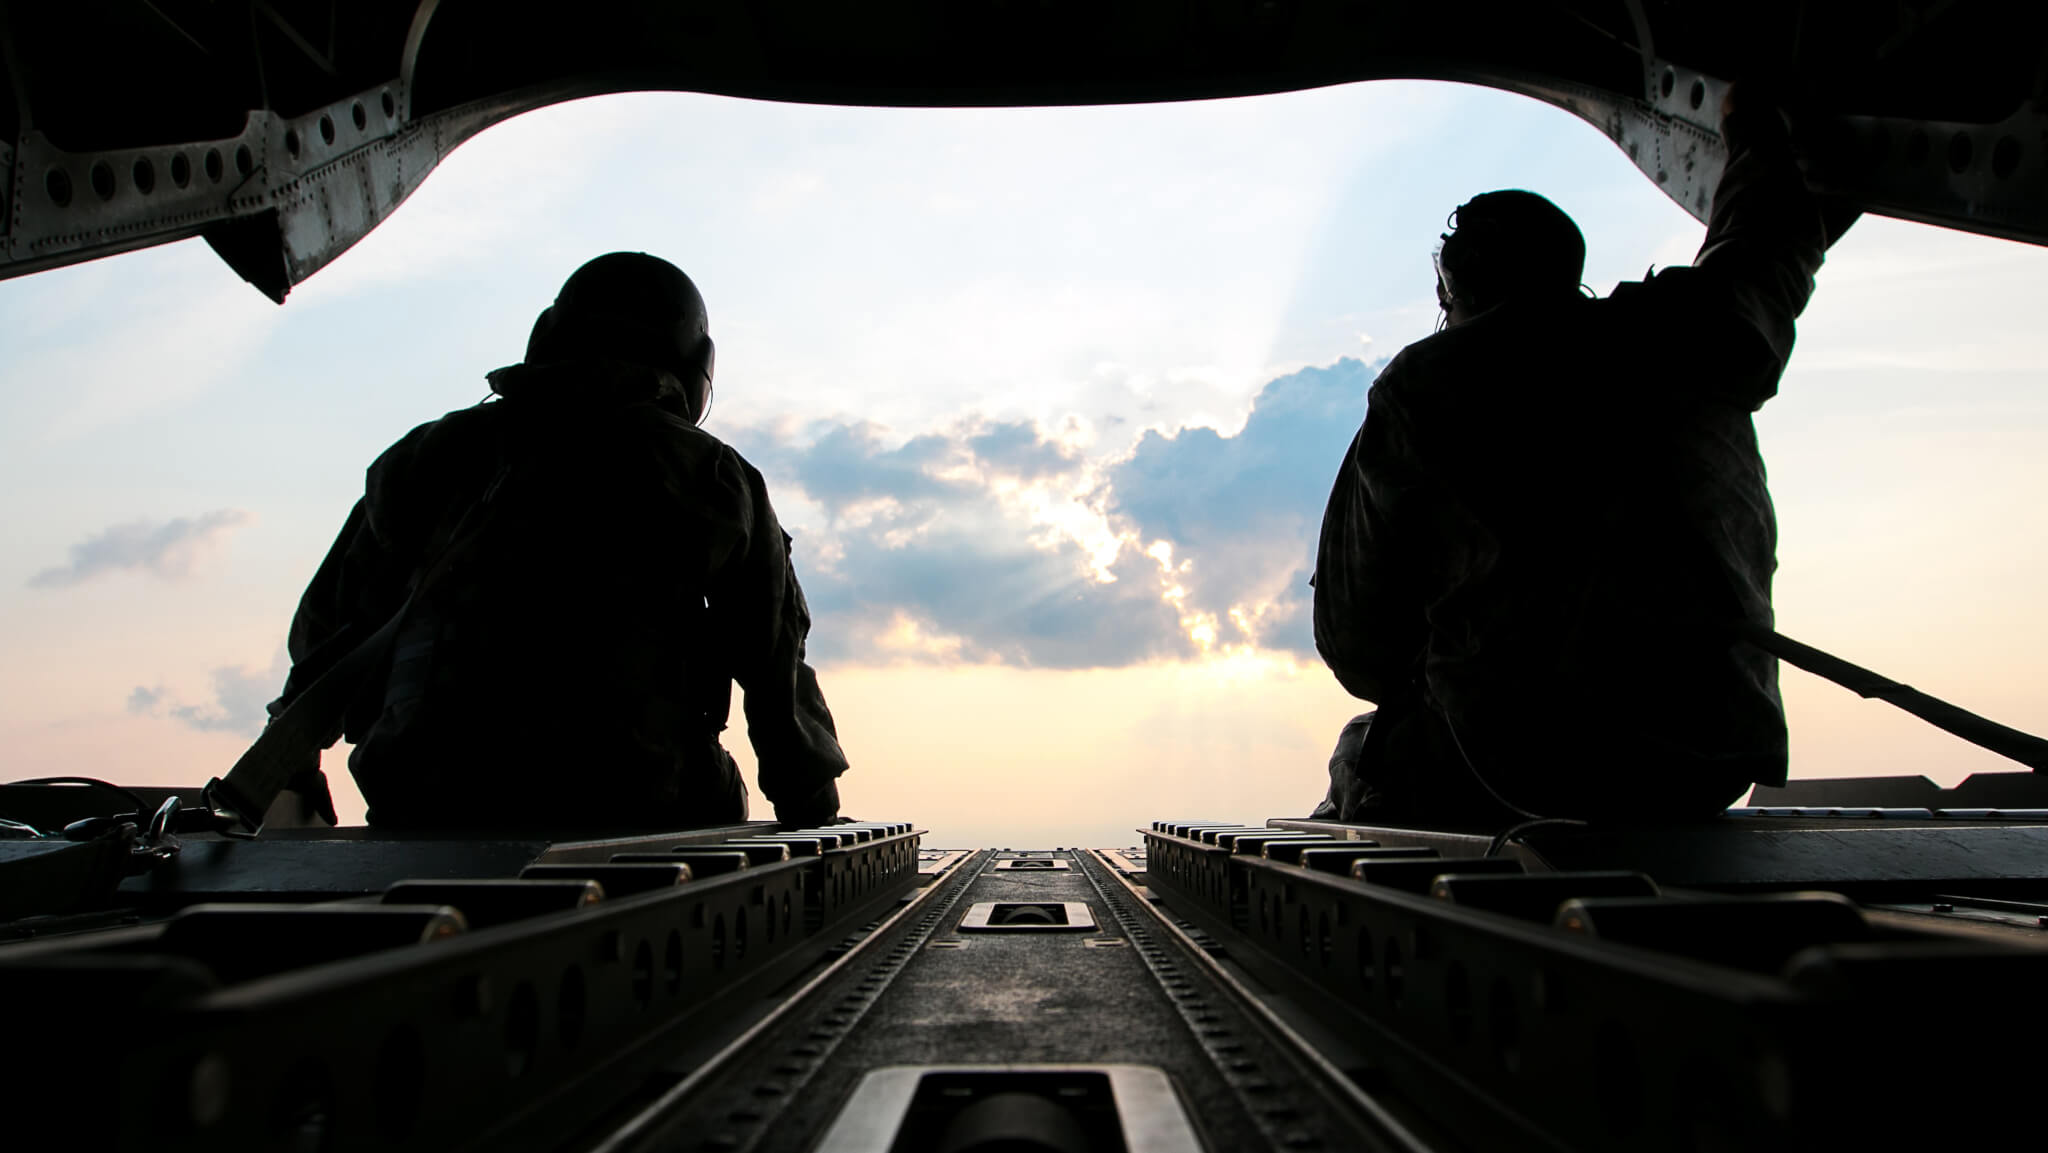 U.S. Army Sgt. 1st Class Roy Chandler, left, and Spc. Benjamin Grogan, assigned to Bravo Company, 1st Battalion, 169th Aviation Regiment, Alabama Army National Guard, sit on the tail of a CH-47 Chinook helicopter in route to deliver hay bales to cattle that have been stranded by Hurricane Harvey near Hampshire, Texas, Sep. 3, 2017. The Department of Defense is conducting Defense Support of Civil Authorities operations in response to the effects of Hurricane Harvey. DSCA operations are part of the DoD’s response capability to assist civilian responders in saving lives, relieving human suffering and mitigating property damage in response to a catastrophic disaster. (U.S. Army photo by Spc. Dustin D. Biven)